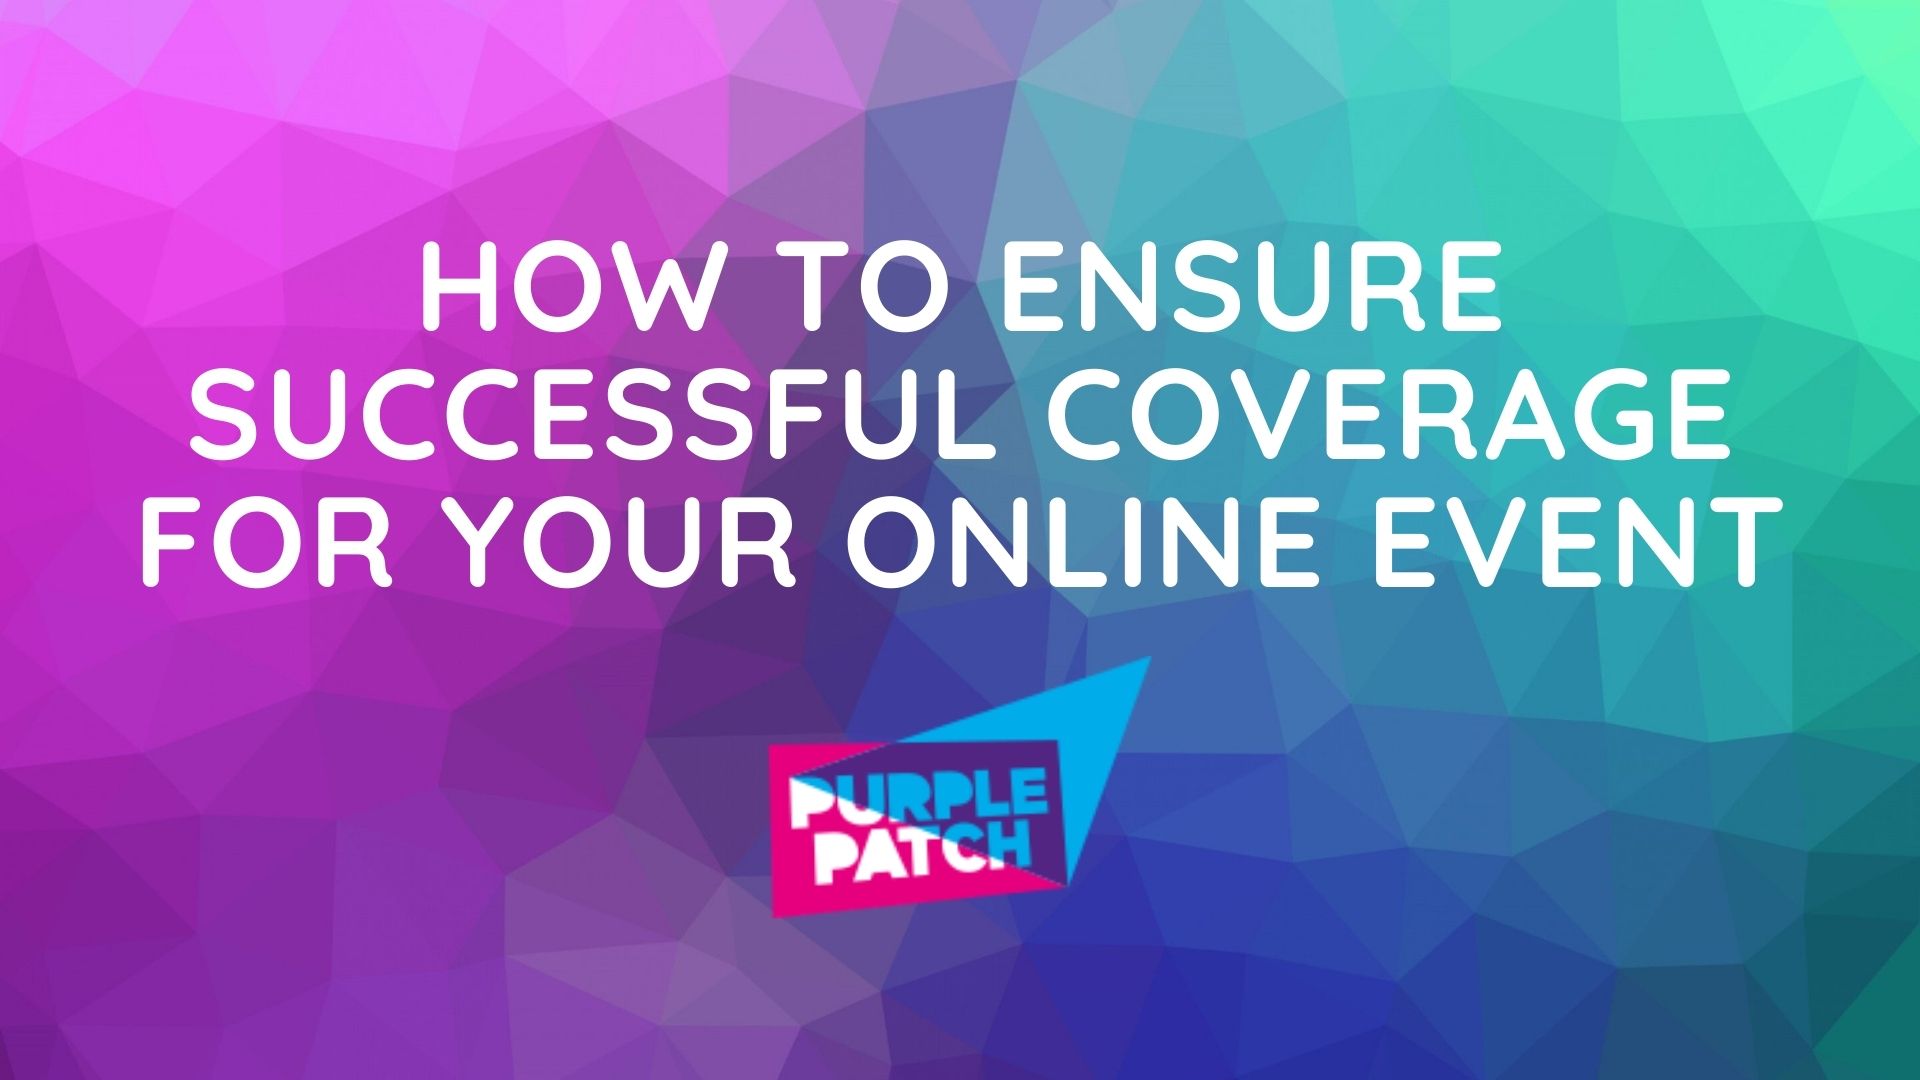 How To Ensure Successful Coverage For Your Online Event